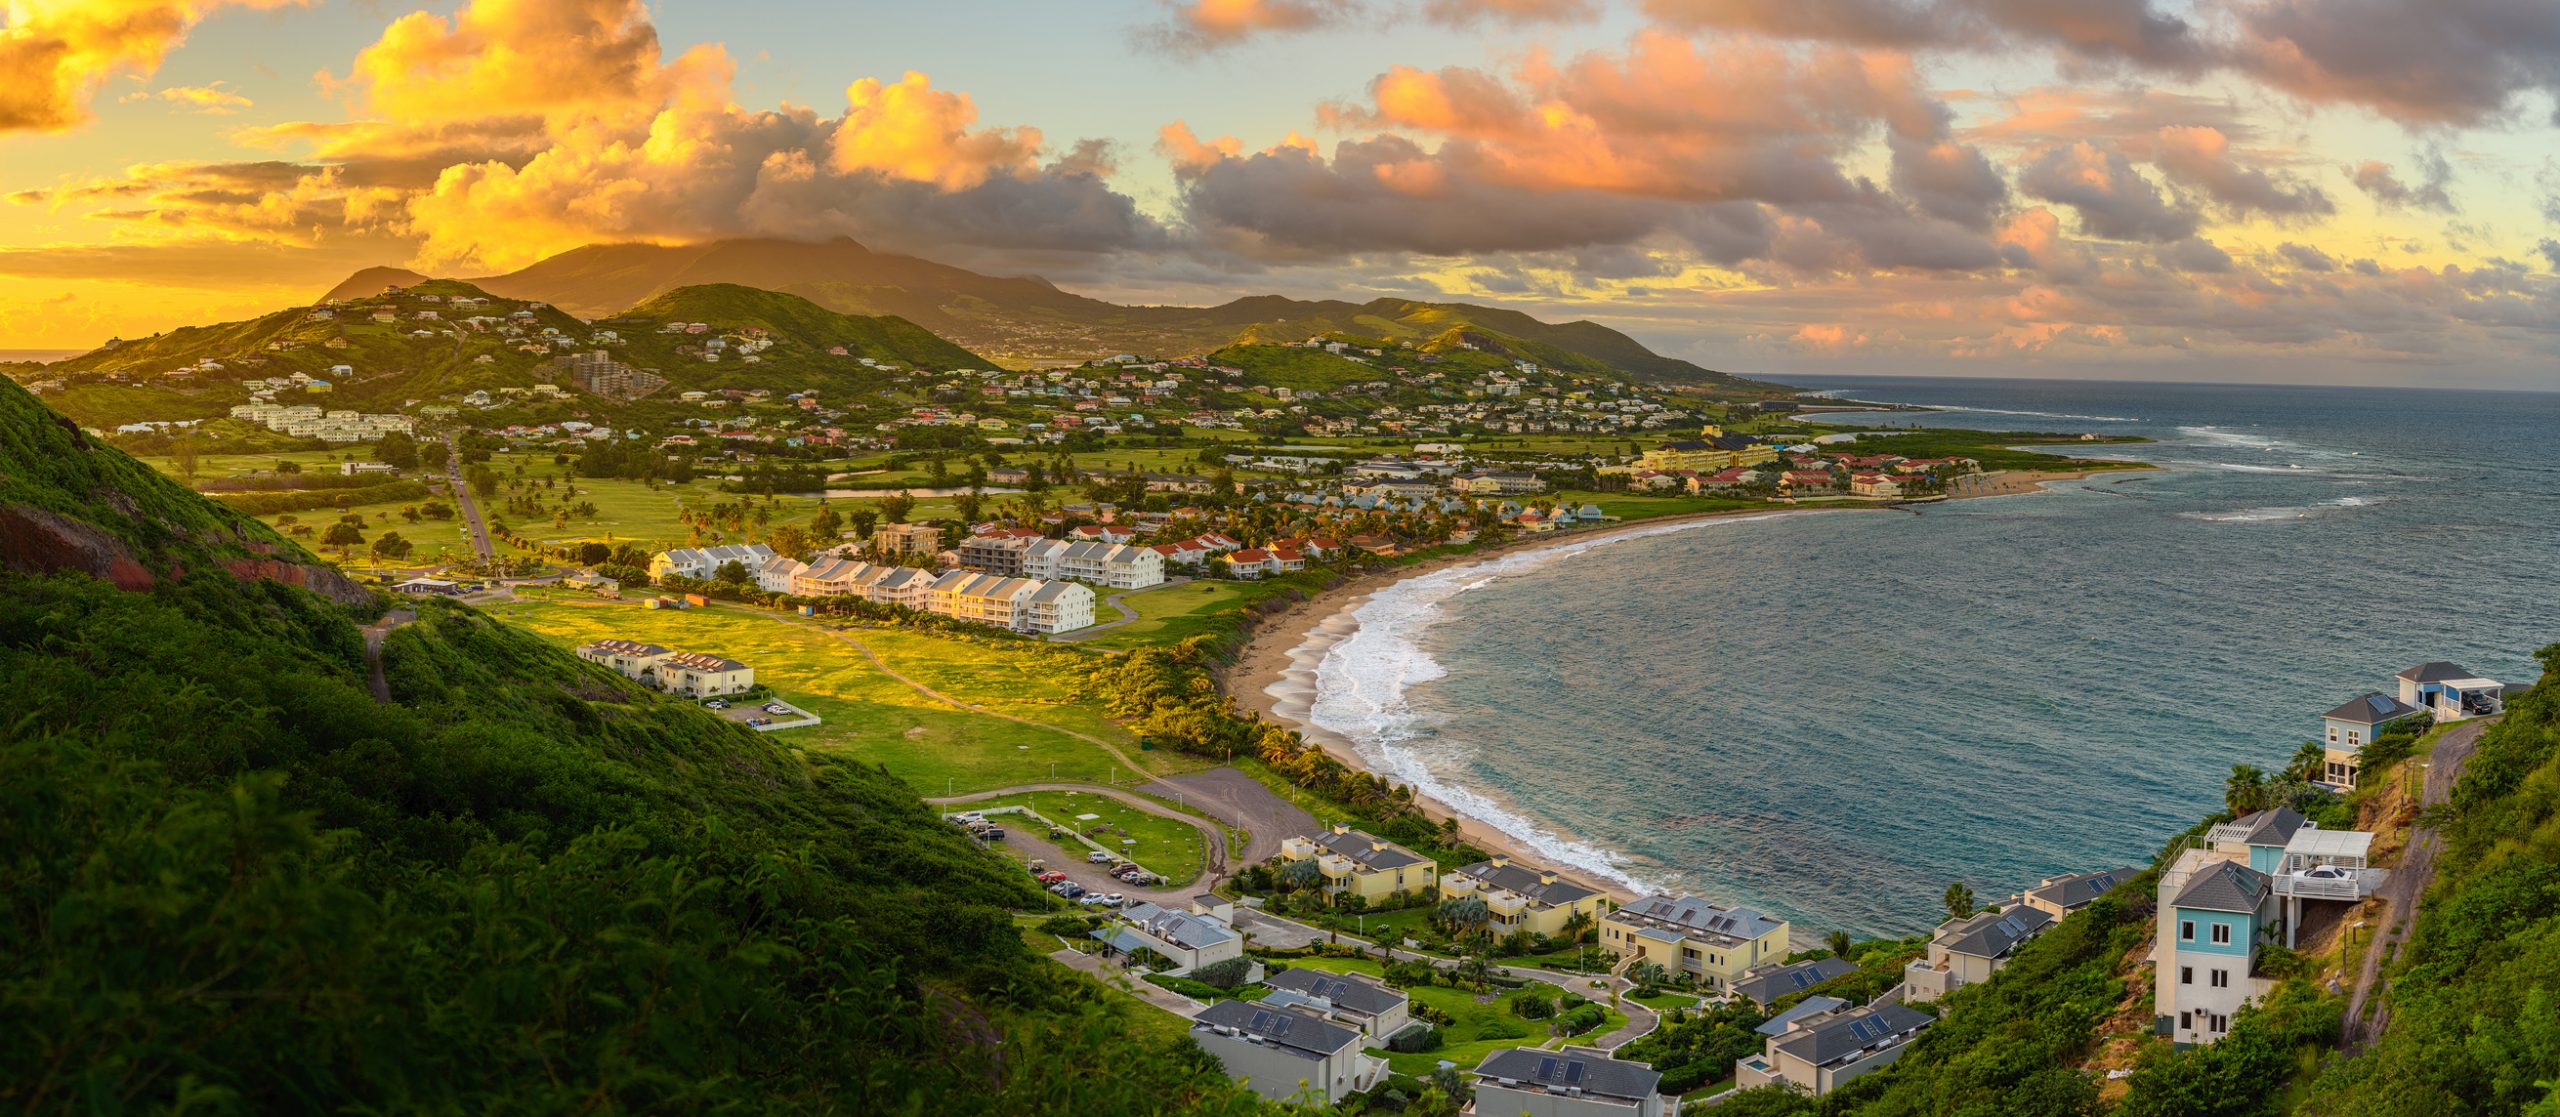 St Kitts best places to visit 2021 travel destinations